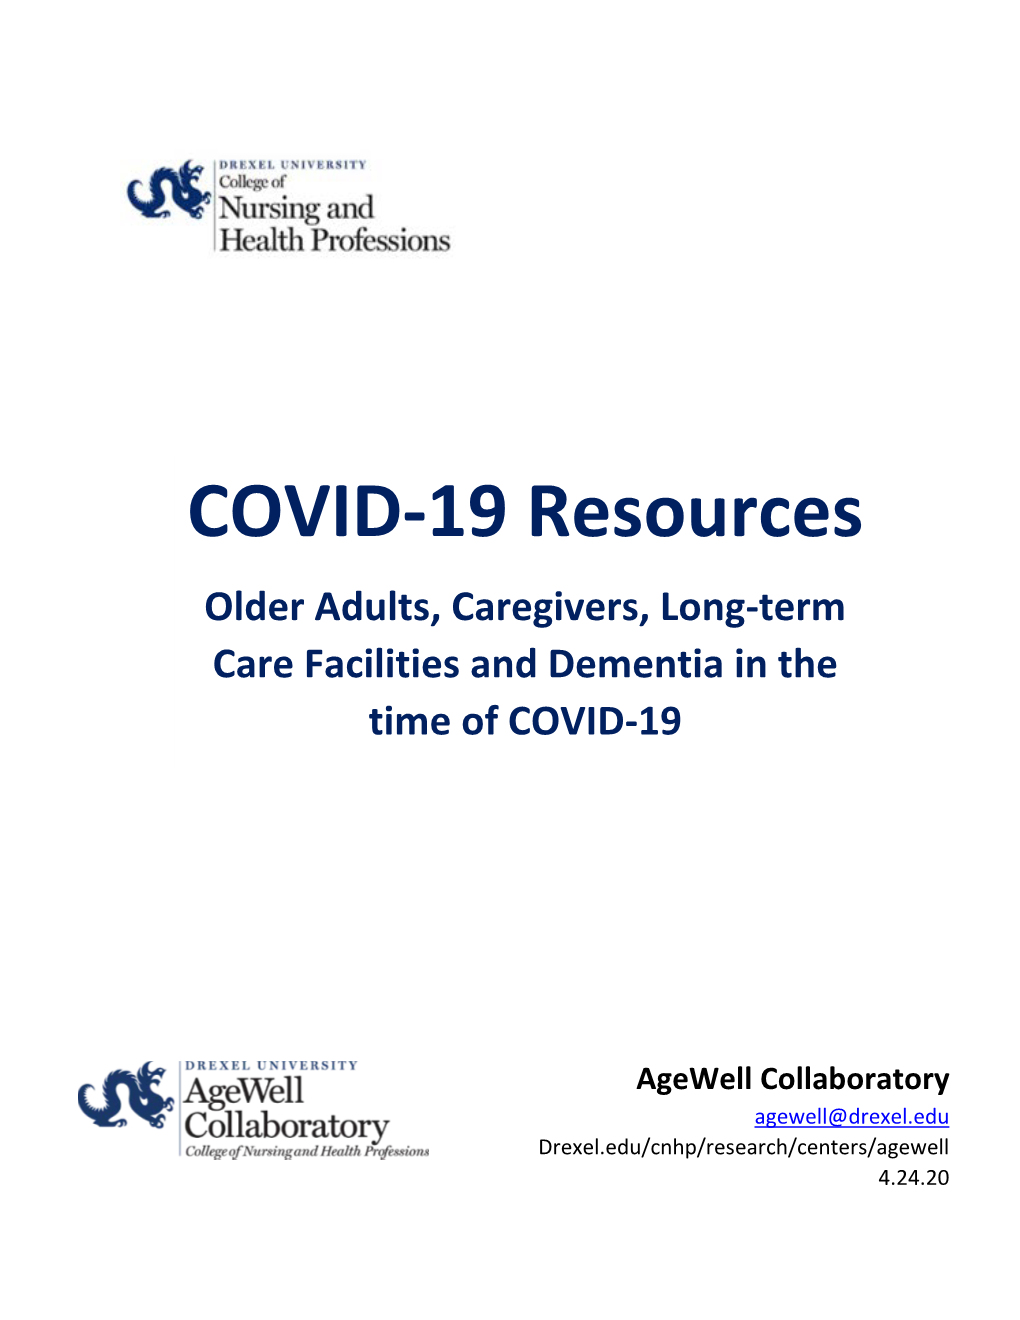 COVID-19 Resources Older Adults, Caregivers, Long-Term Care Facilities and Dementia in the Time of COVID-19